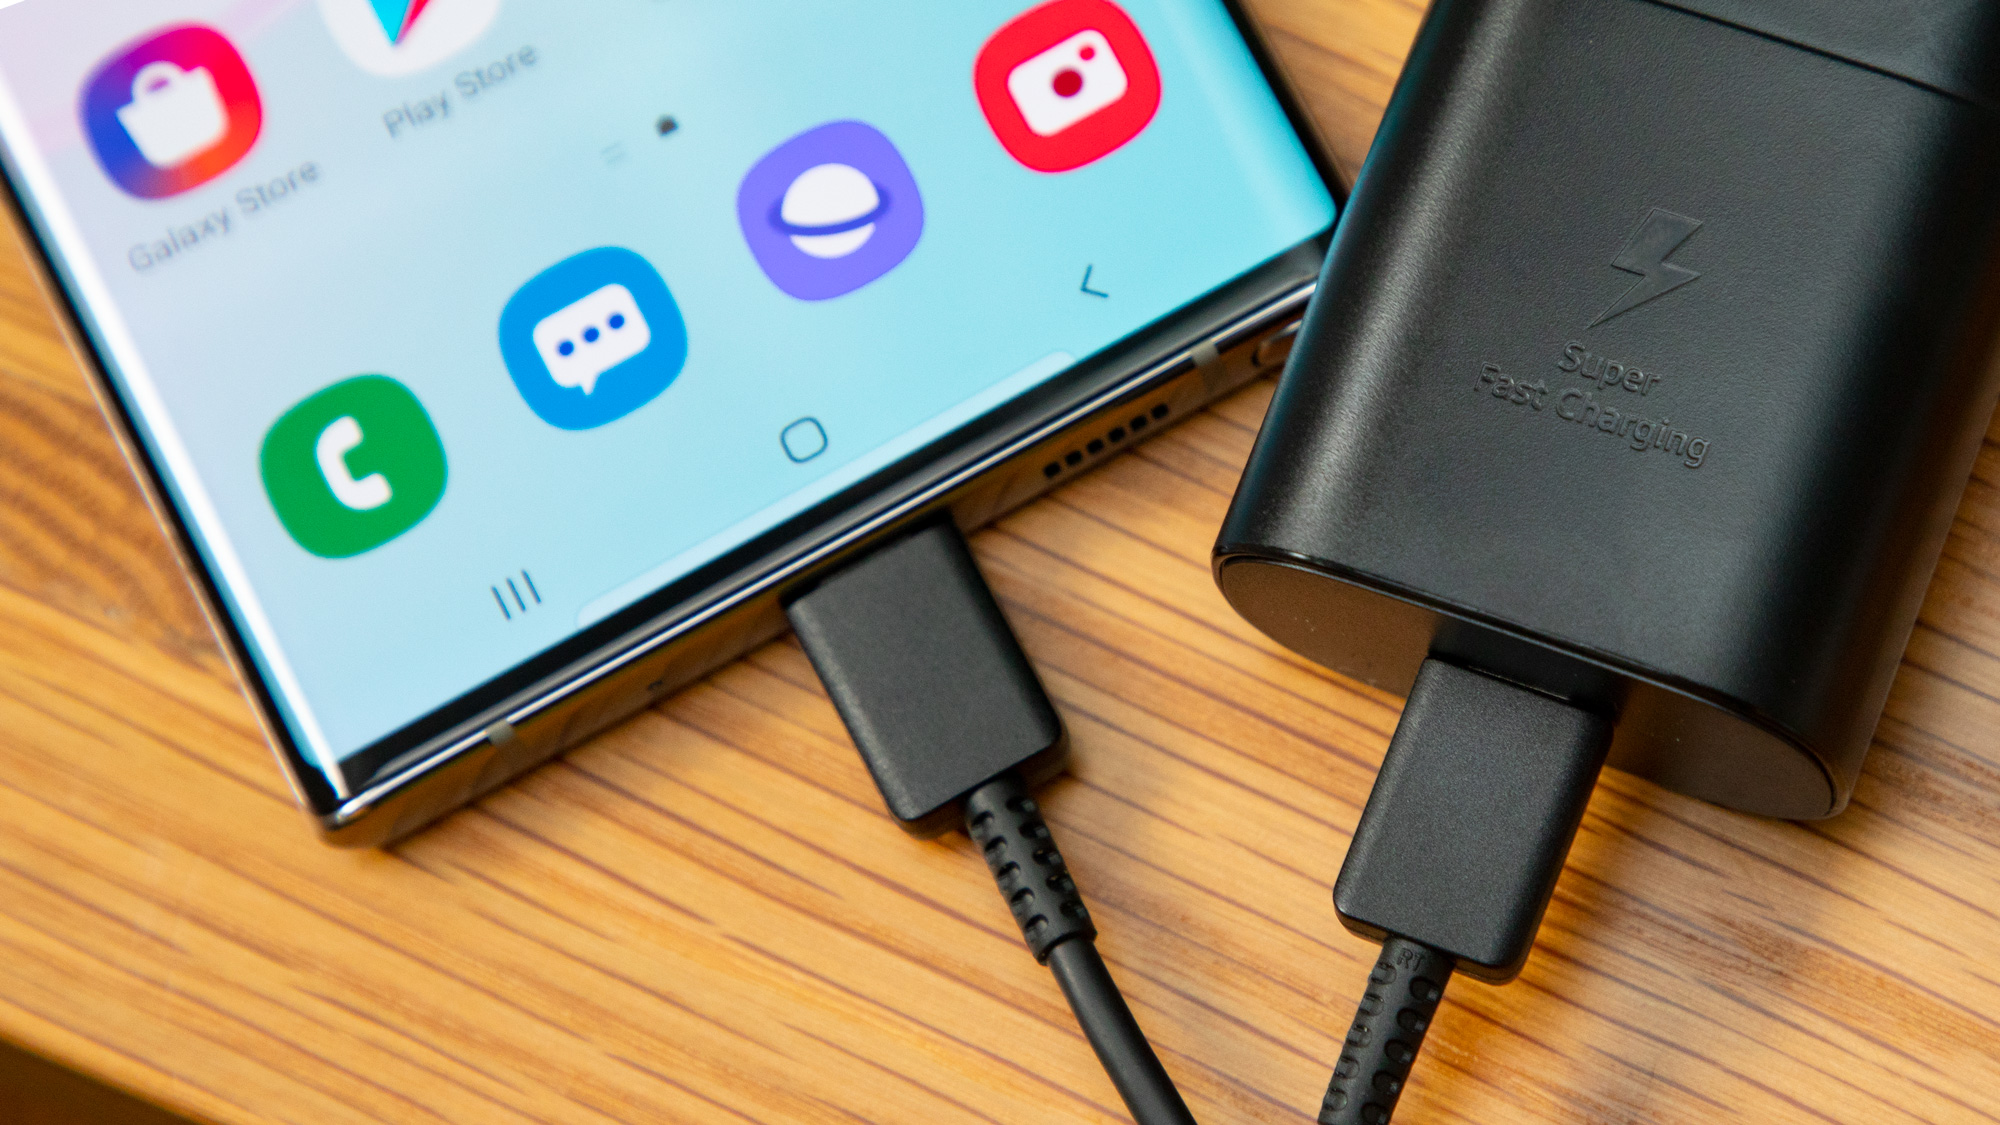 Samsung Galaxy Note10 Pro to have a 4,500 mAh battery - GSMArena